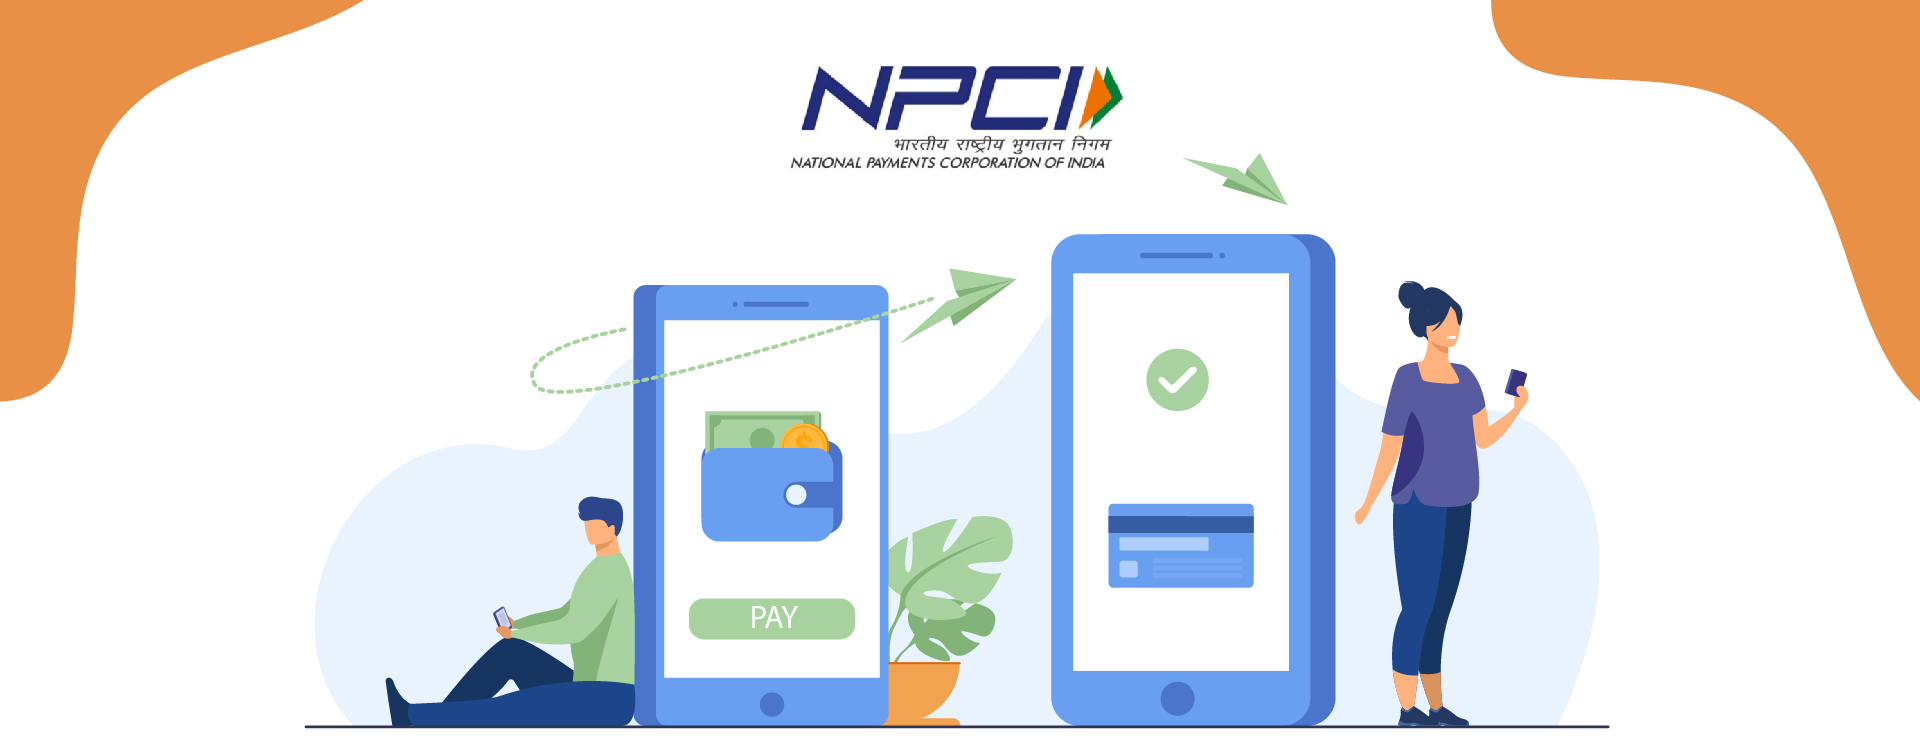 What is the National Payment Corporation of India?